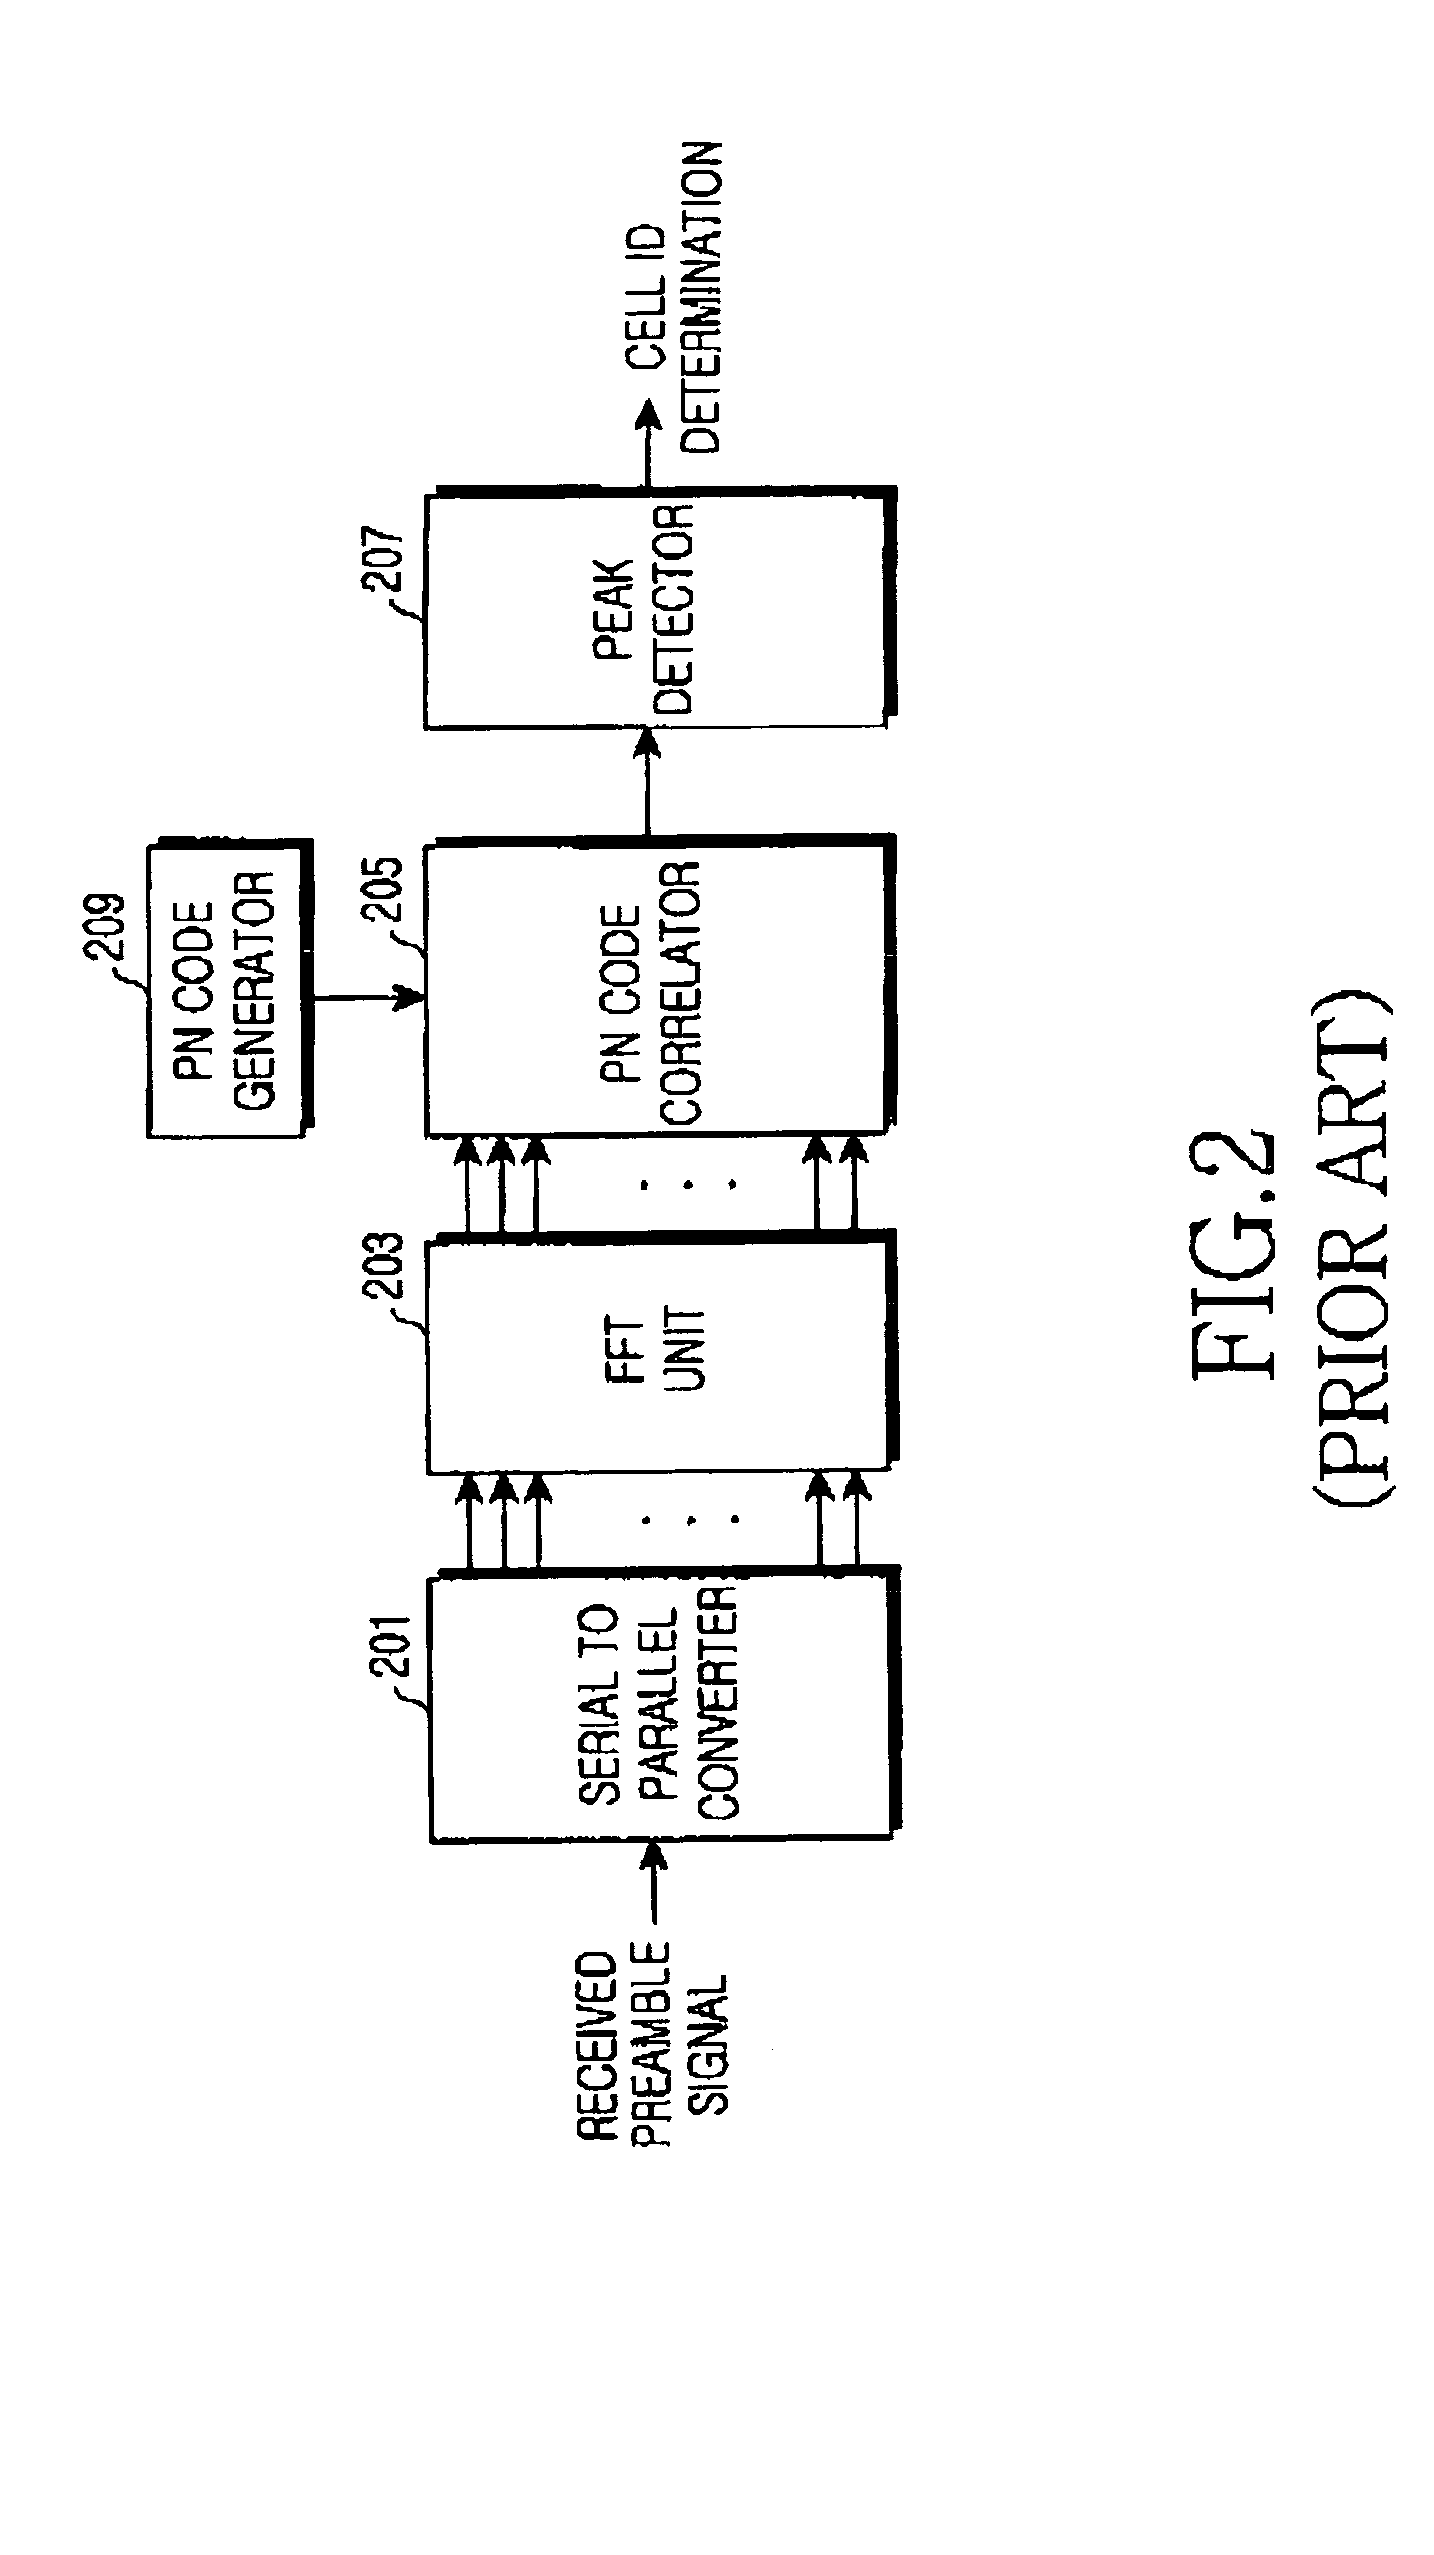 Apparatus and method for generating preamble signal for cell identification in an orthogonal frequency division multiplexing system